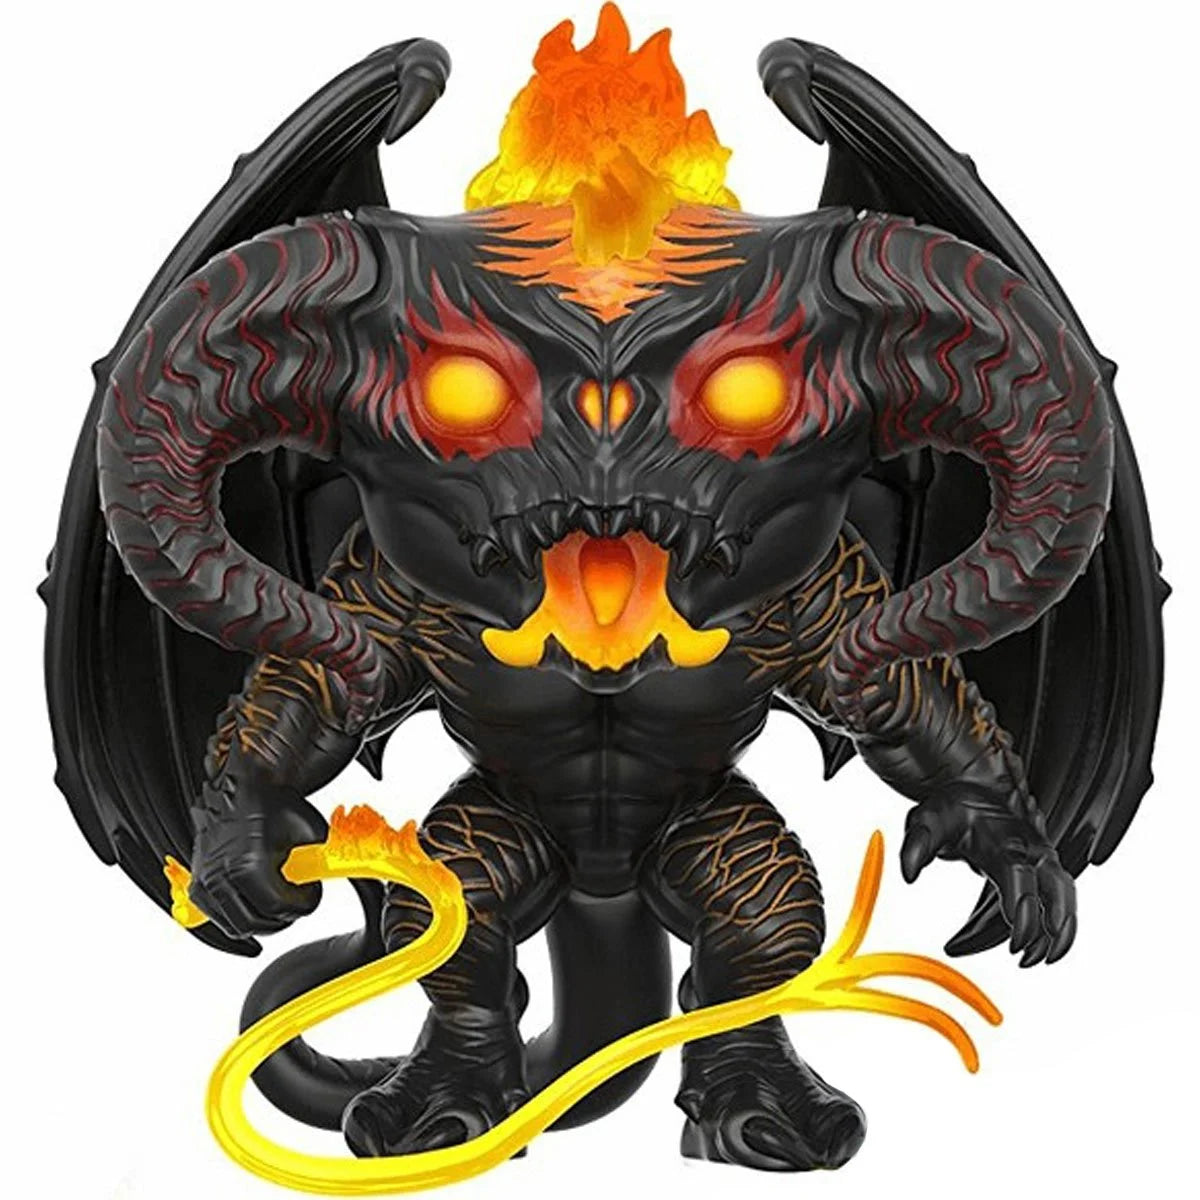 Balrog The Lord of the Rings 6-Inch Pop! Vinyl Figure